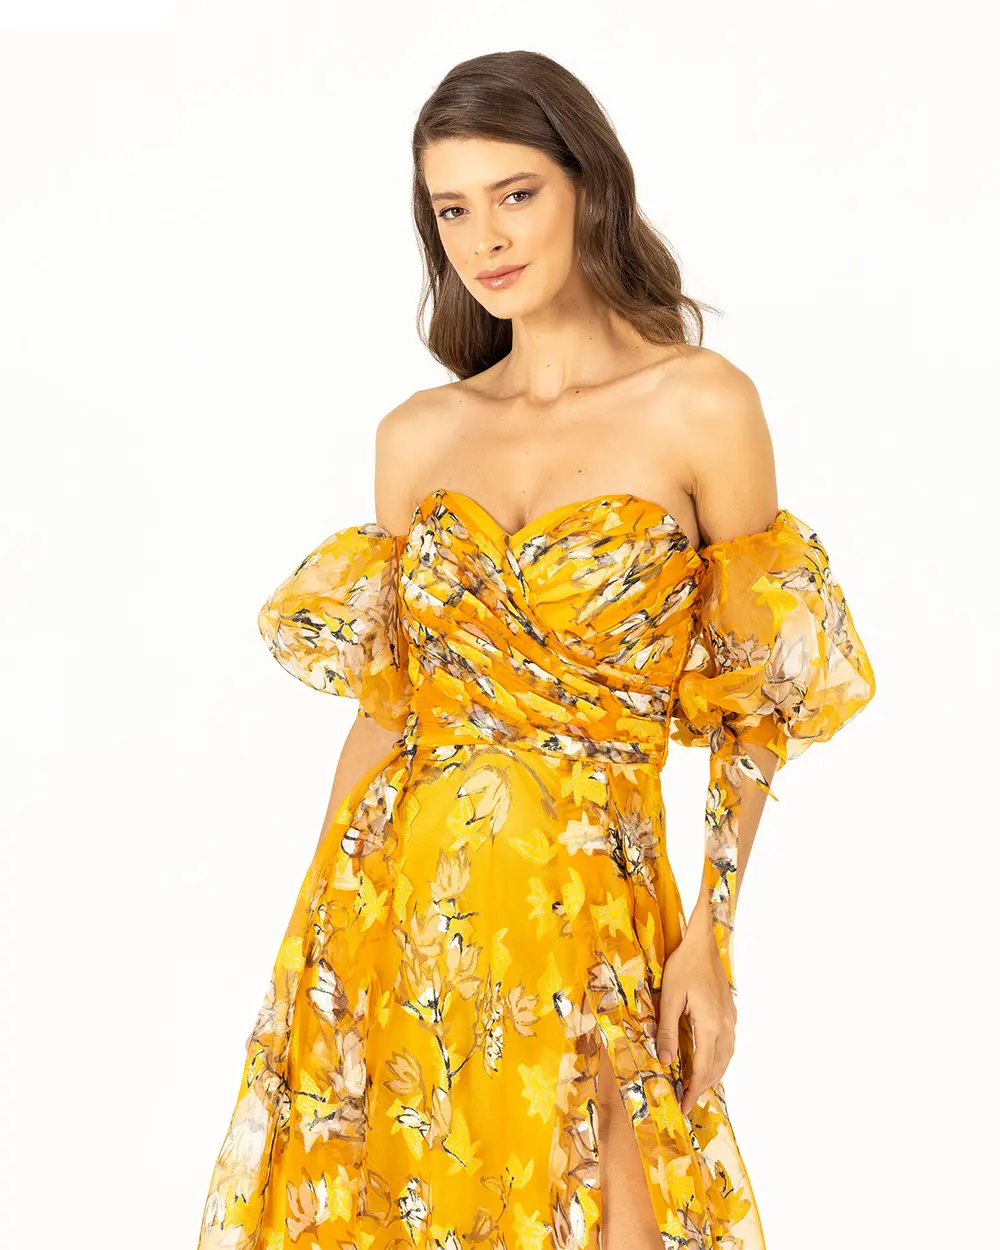  FLORAL PATTERNED EVENING DRESS WITH BALLOON SLEEVES